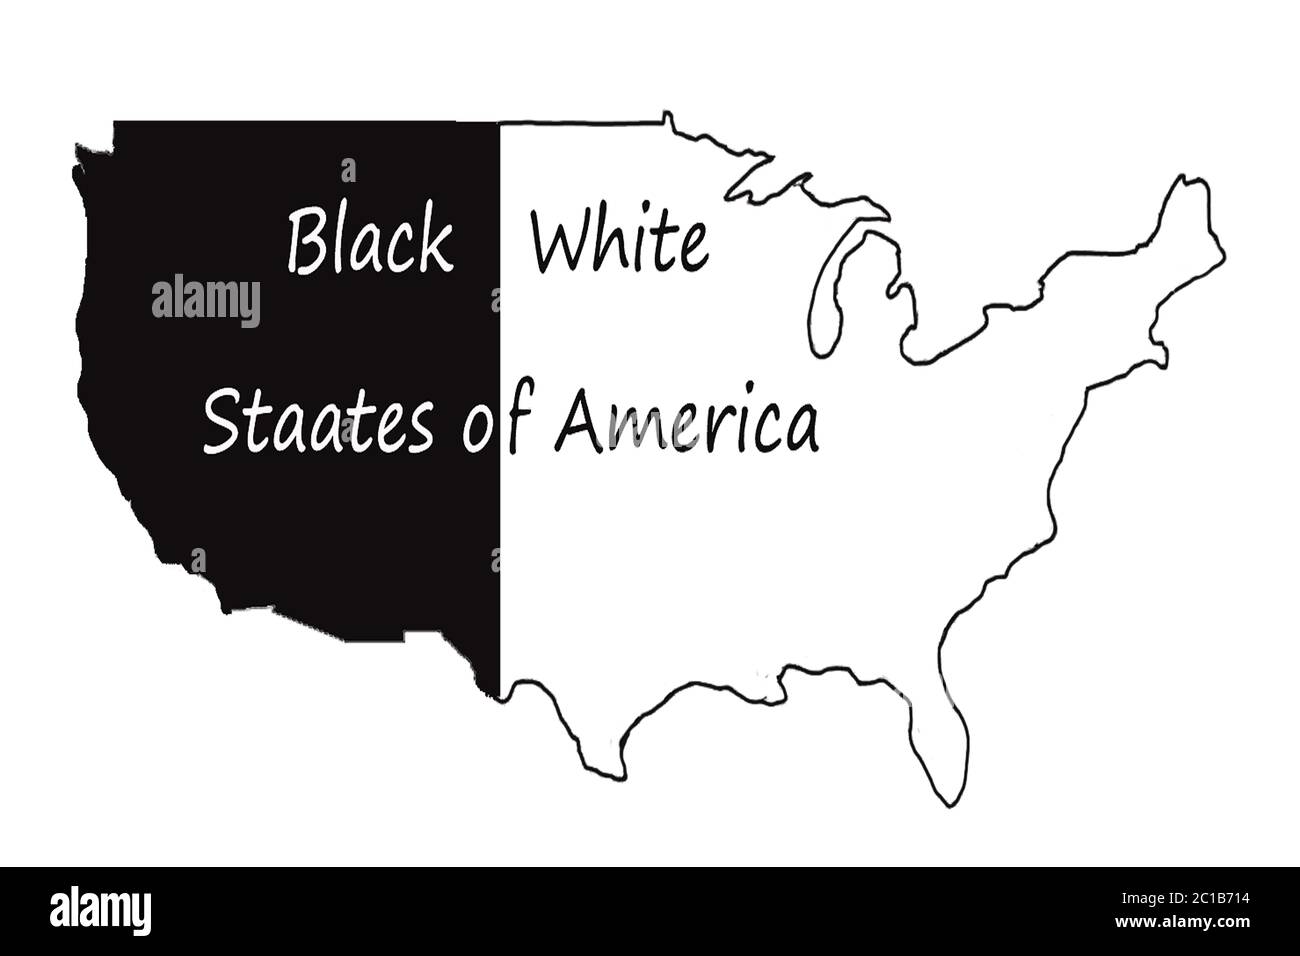 Stop racism Us. Black Lives Matter. Protest Banner about Human Right of Black People in U.S. America. Map black white america Stock Photo